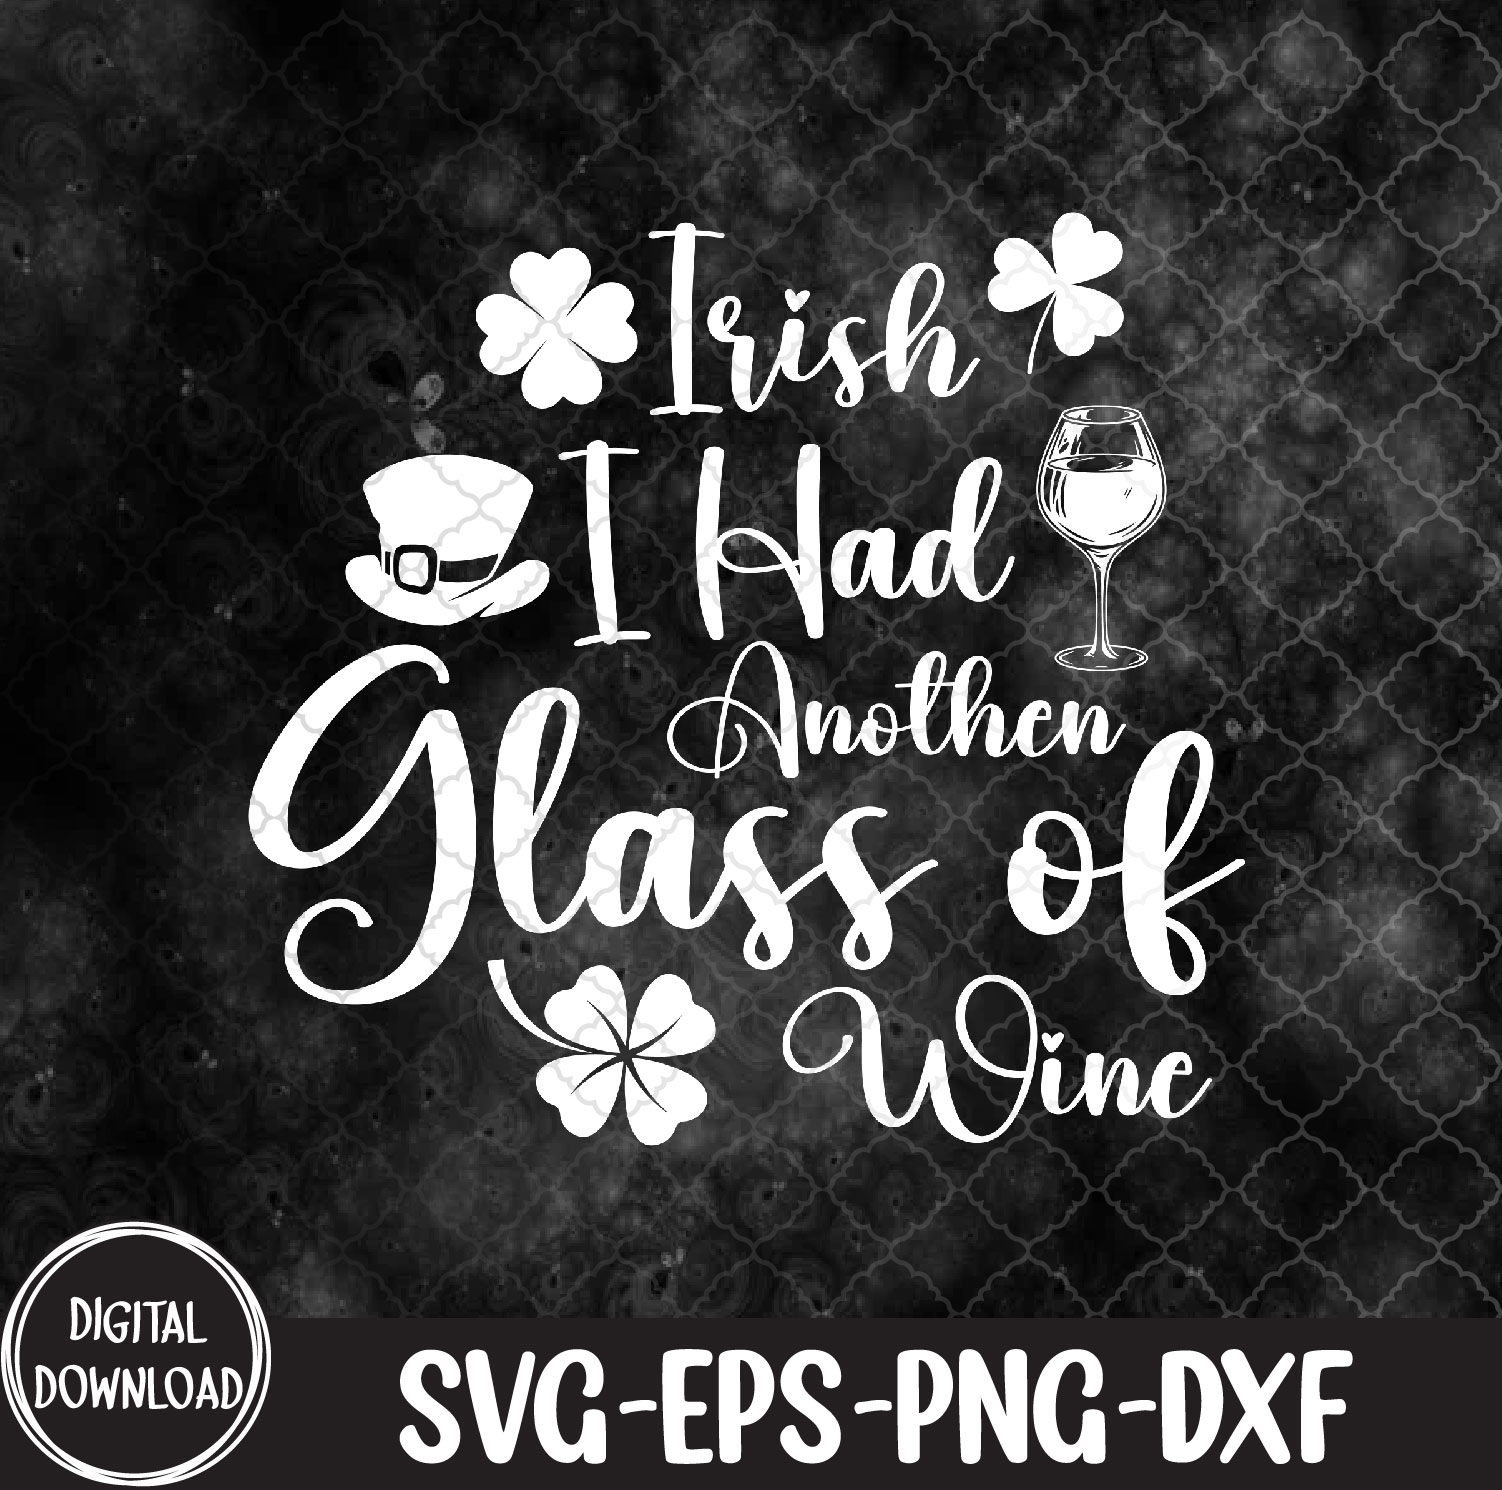 WTMNEW9file 09 48 Irish I Had Another Glass Of Wine St Patrick's Day Drinking, Svg, Eps, Png, Dxf